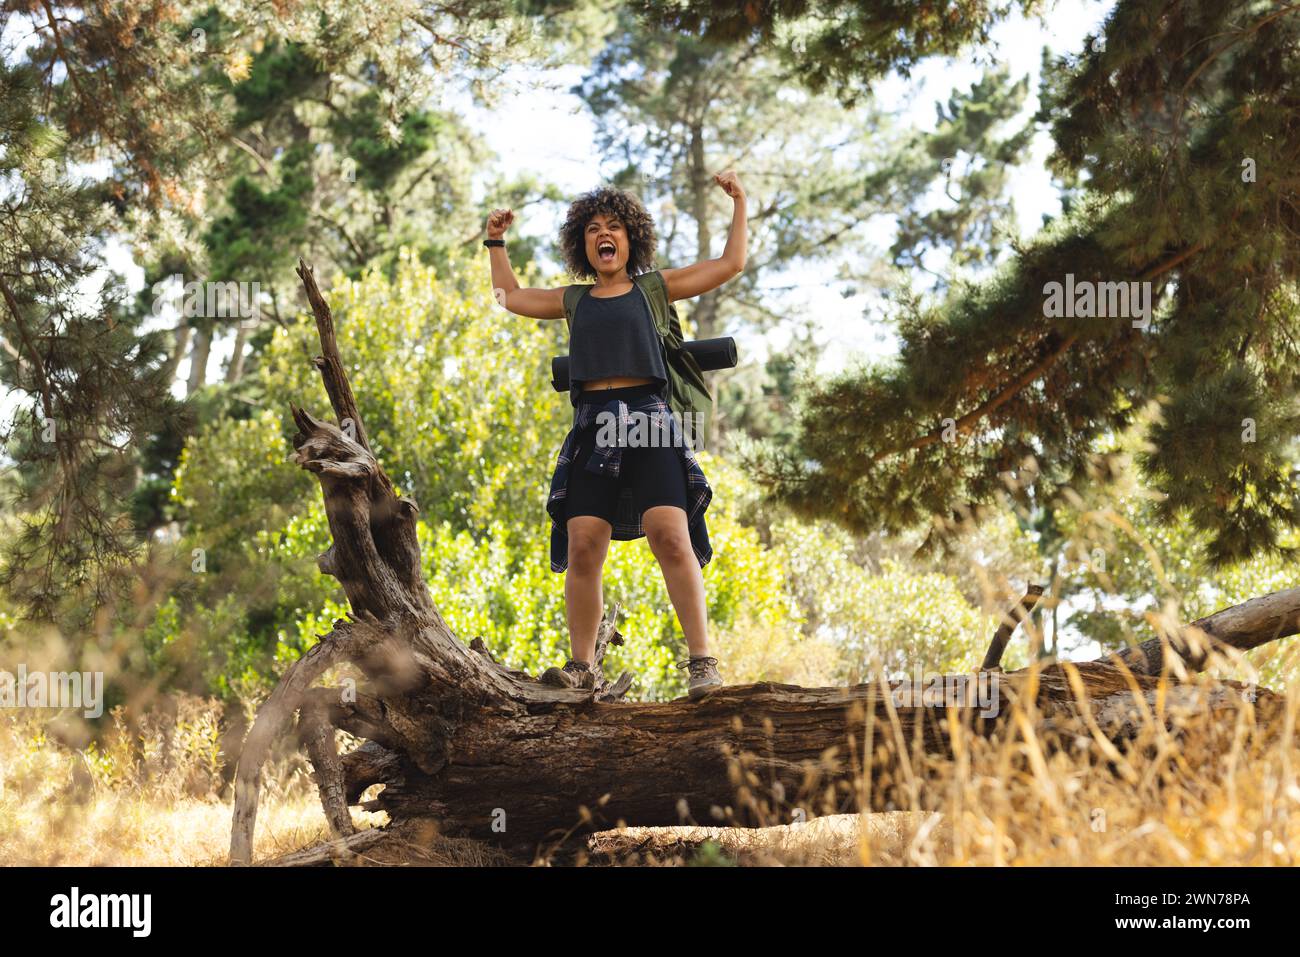 Young biracial woman stands triumphantly on a fallen tree trunk outdoors on a hike Stock Photo